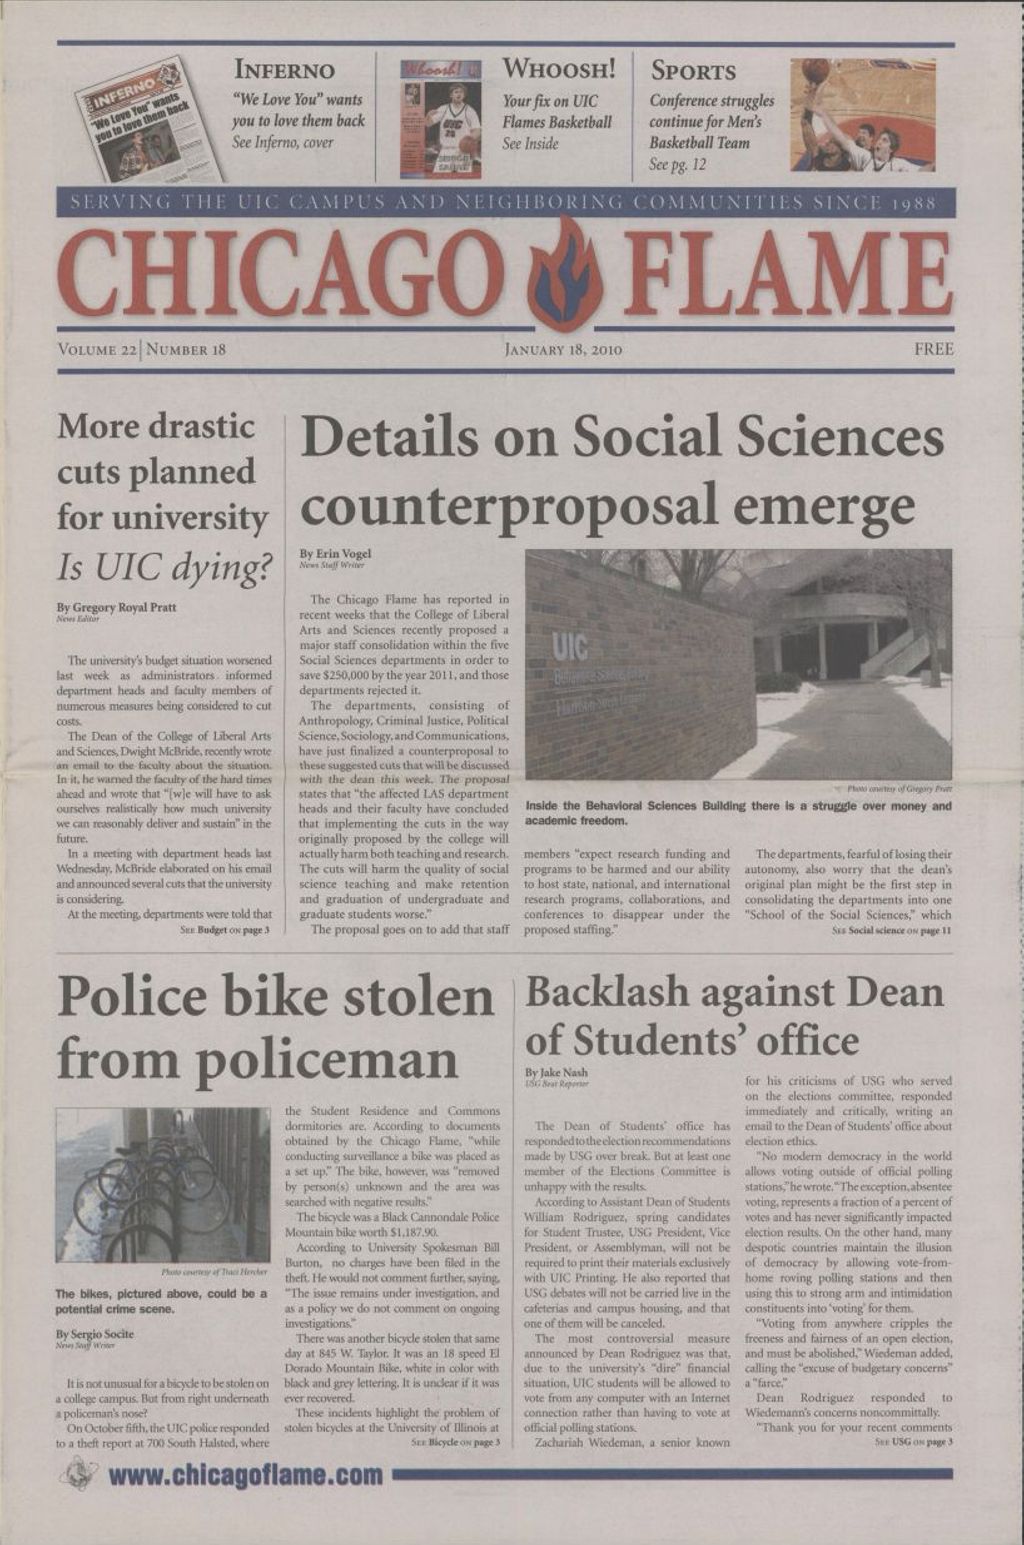 Chicago Flame (January 18, 2010)